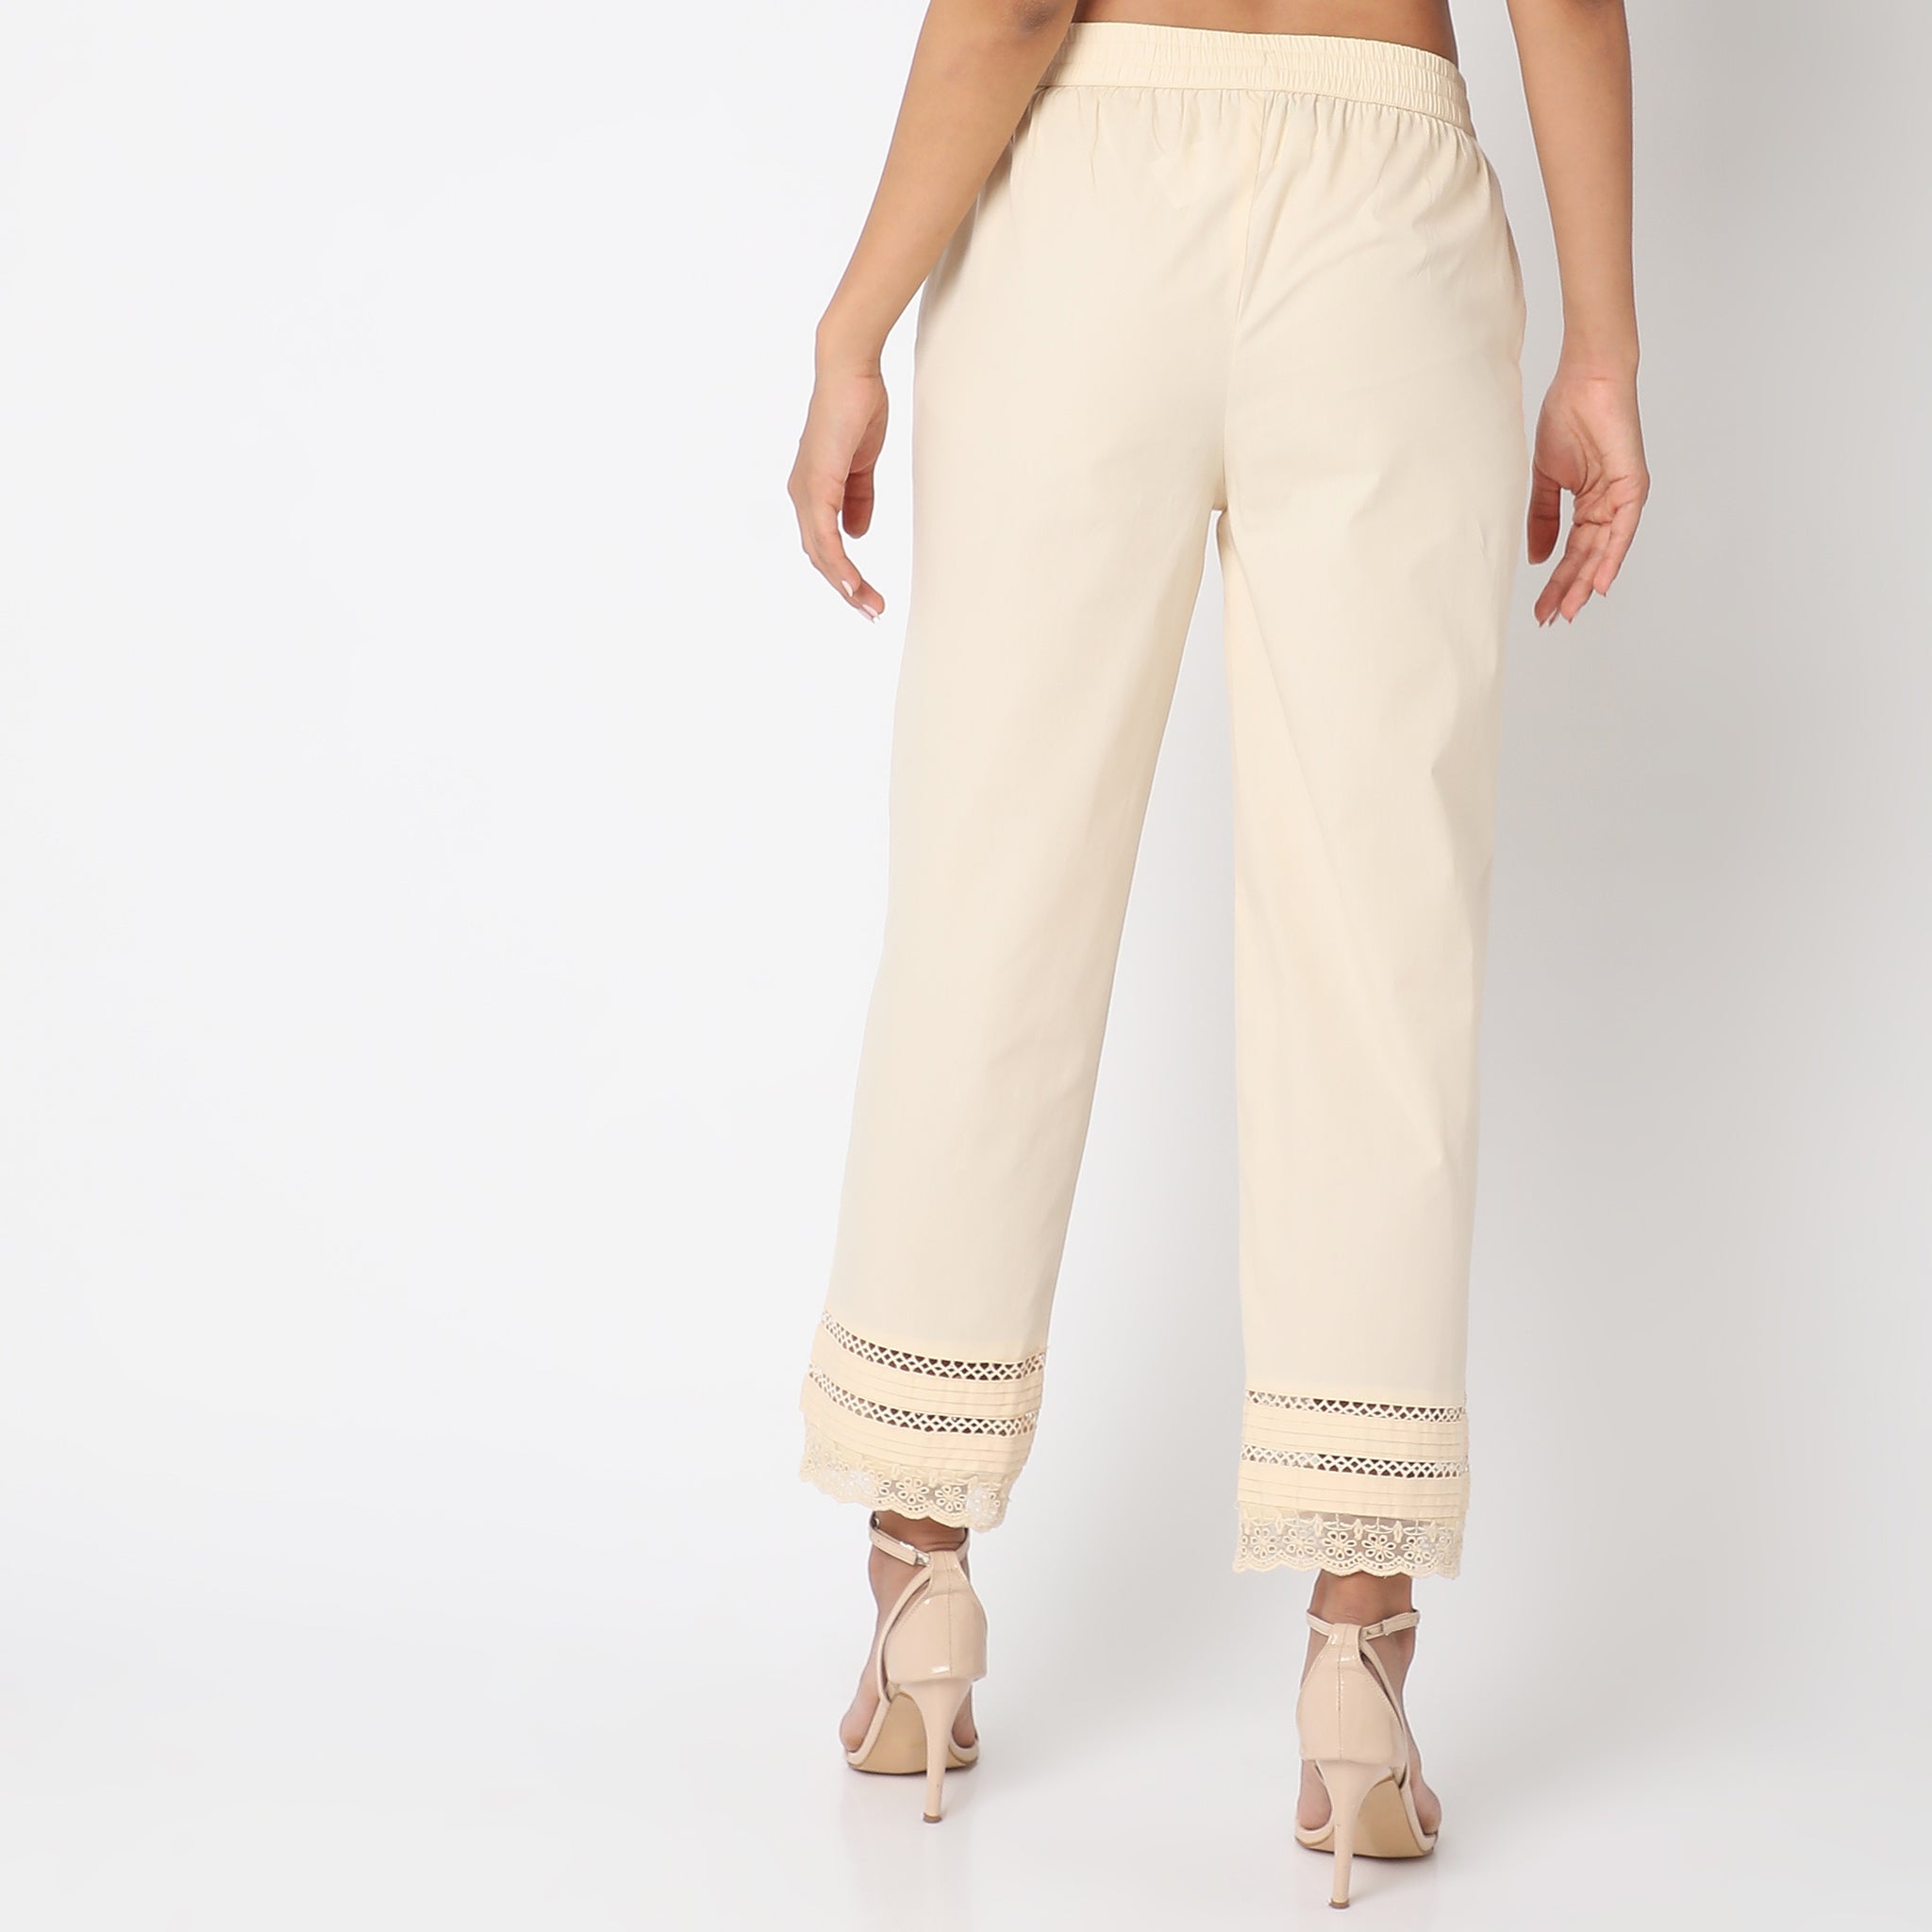 Cigarette pant | Ethnic and Beyond